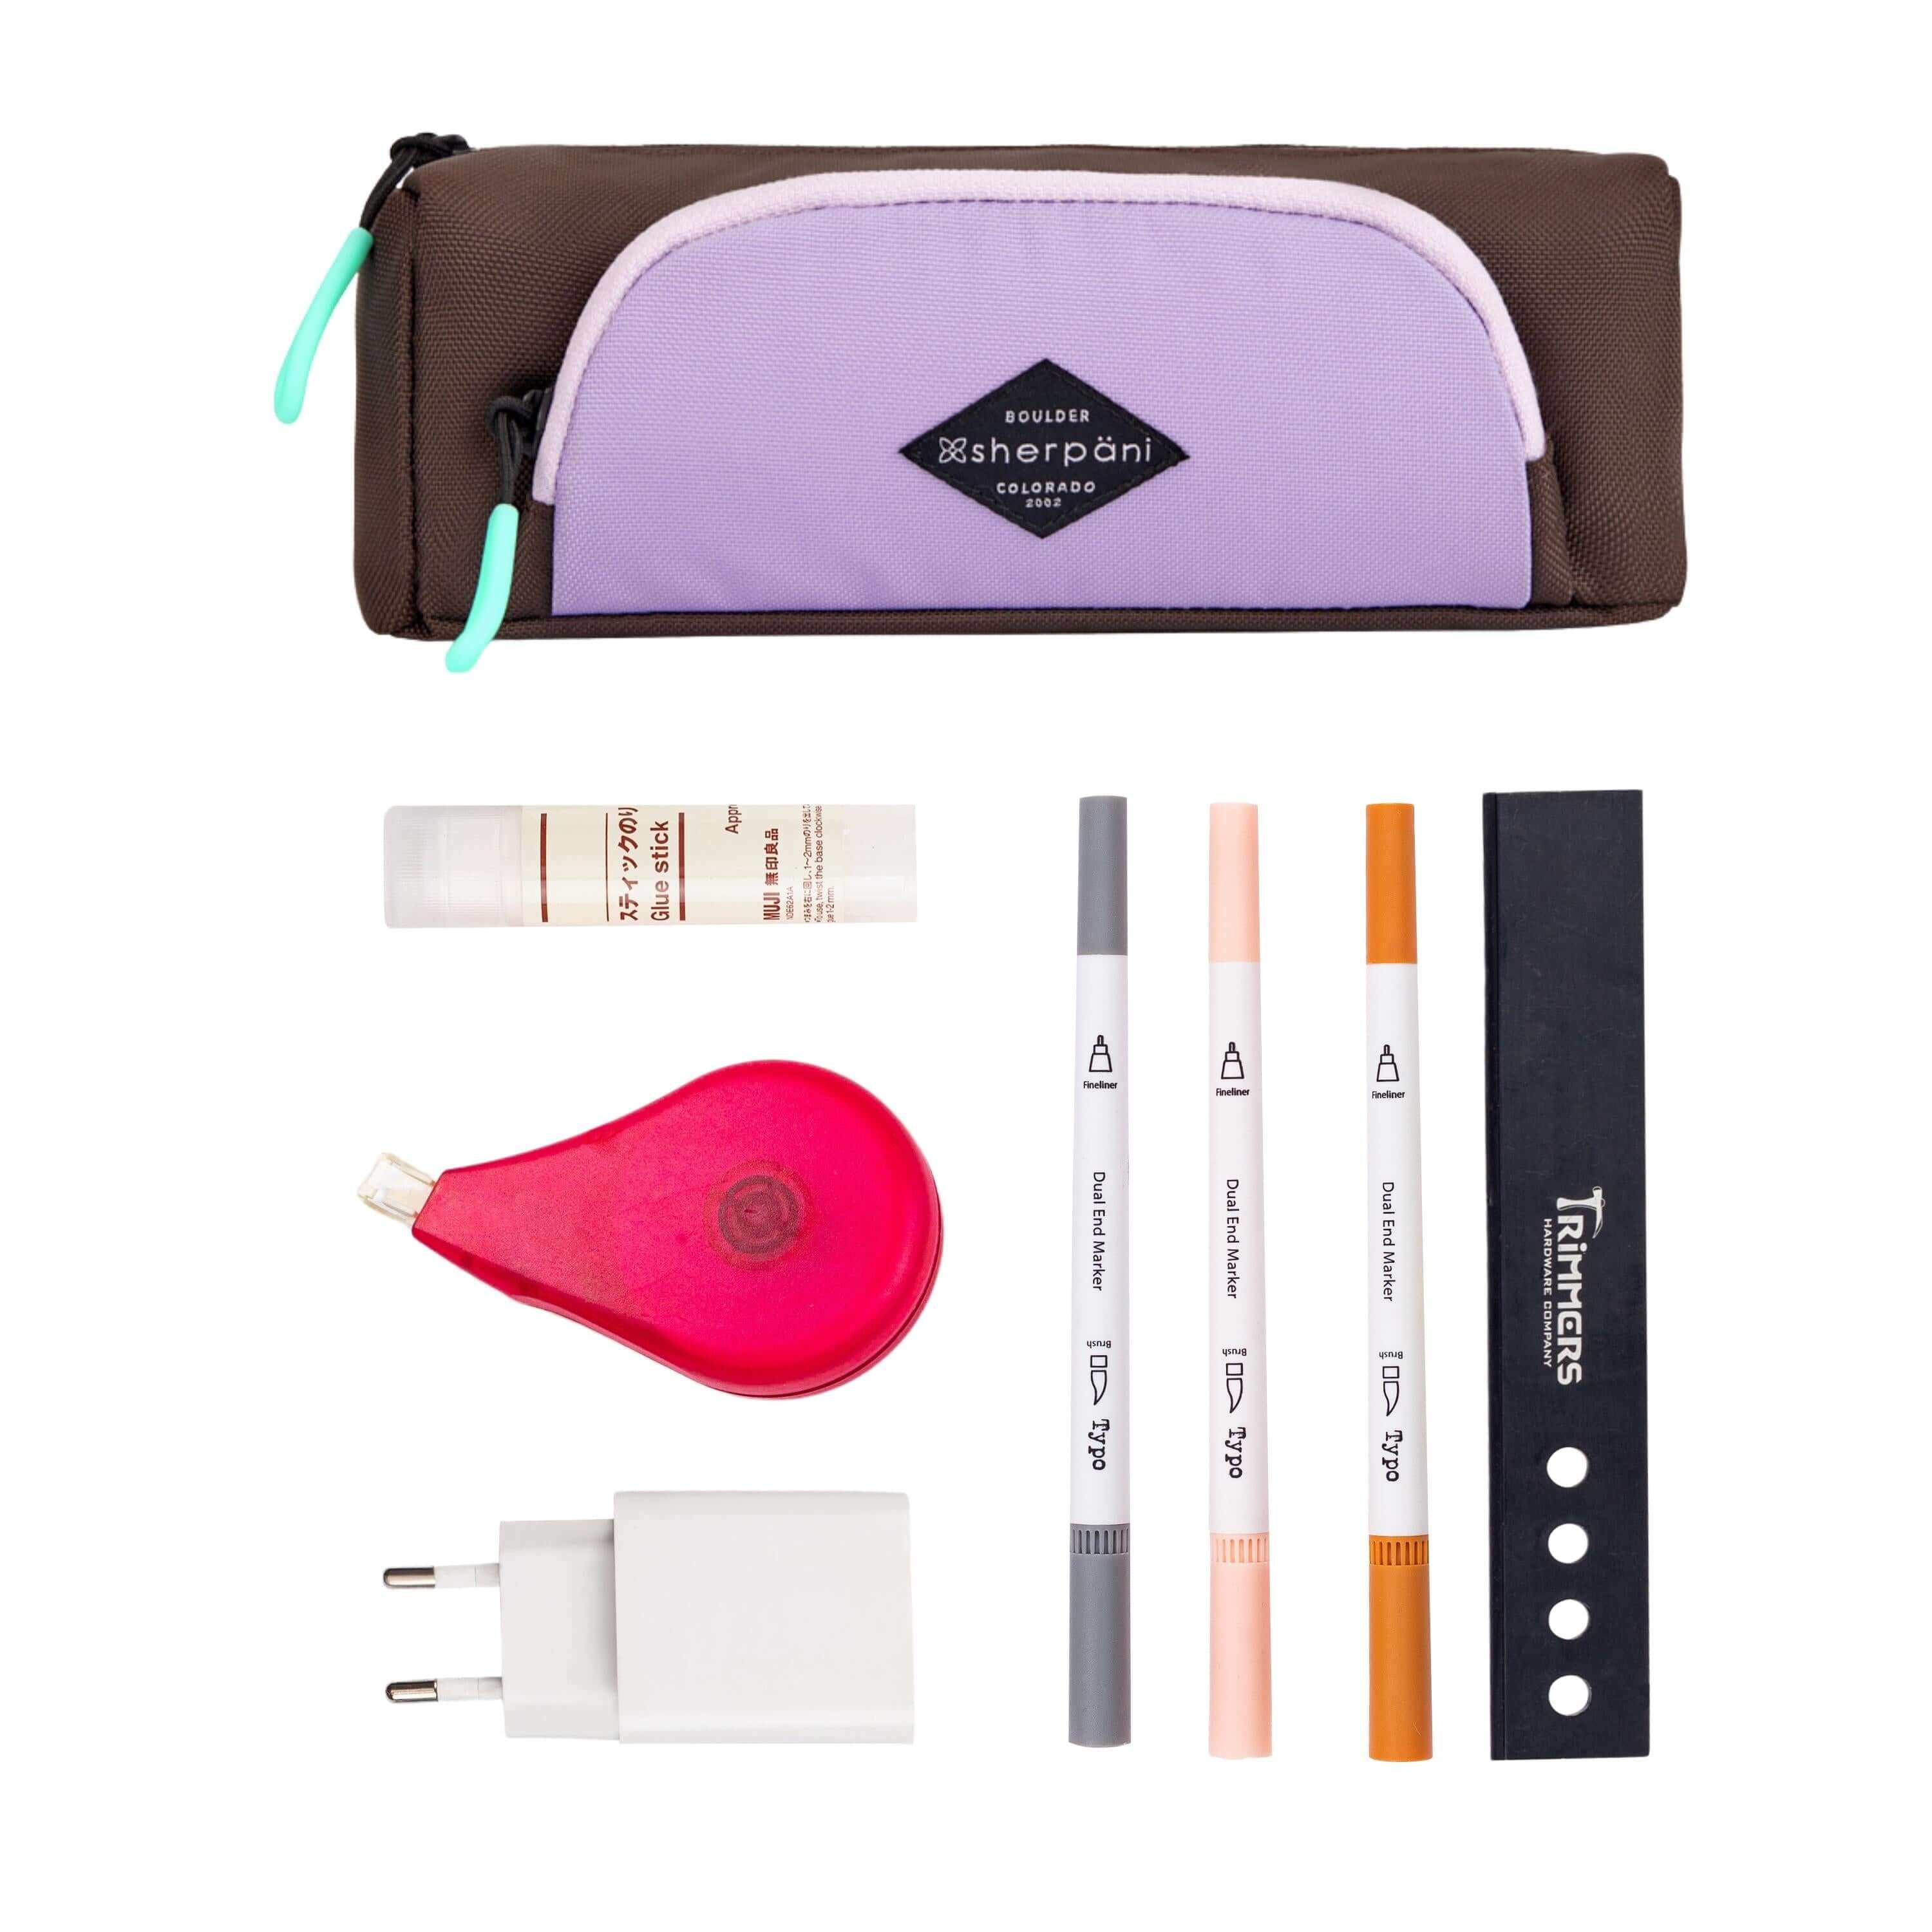 Top view of example items to fill the pouch. Sherpani travel accessory, the Poet in Lavender, lies at the top. Below it are an assortment of items: glue stick, white out, phone charger, markers.